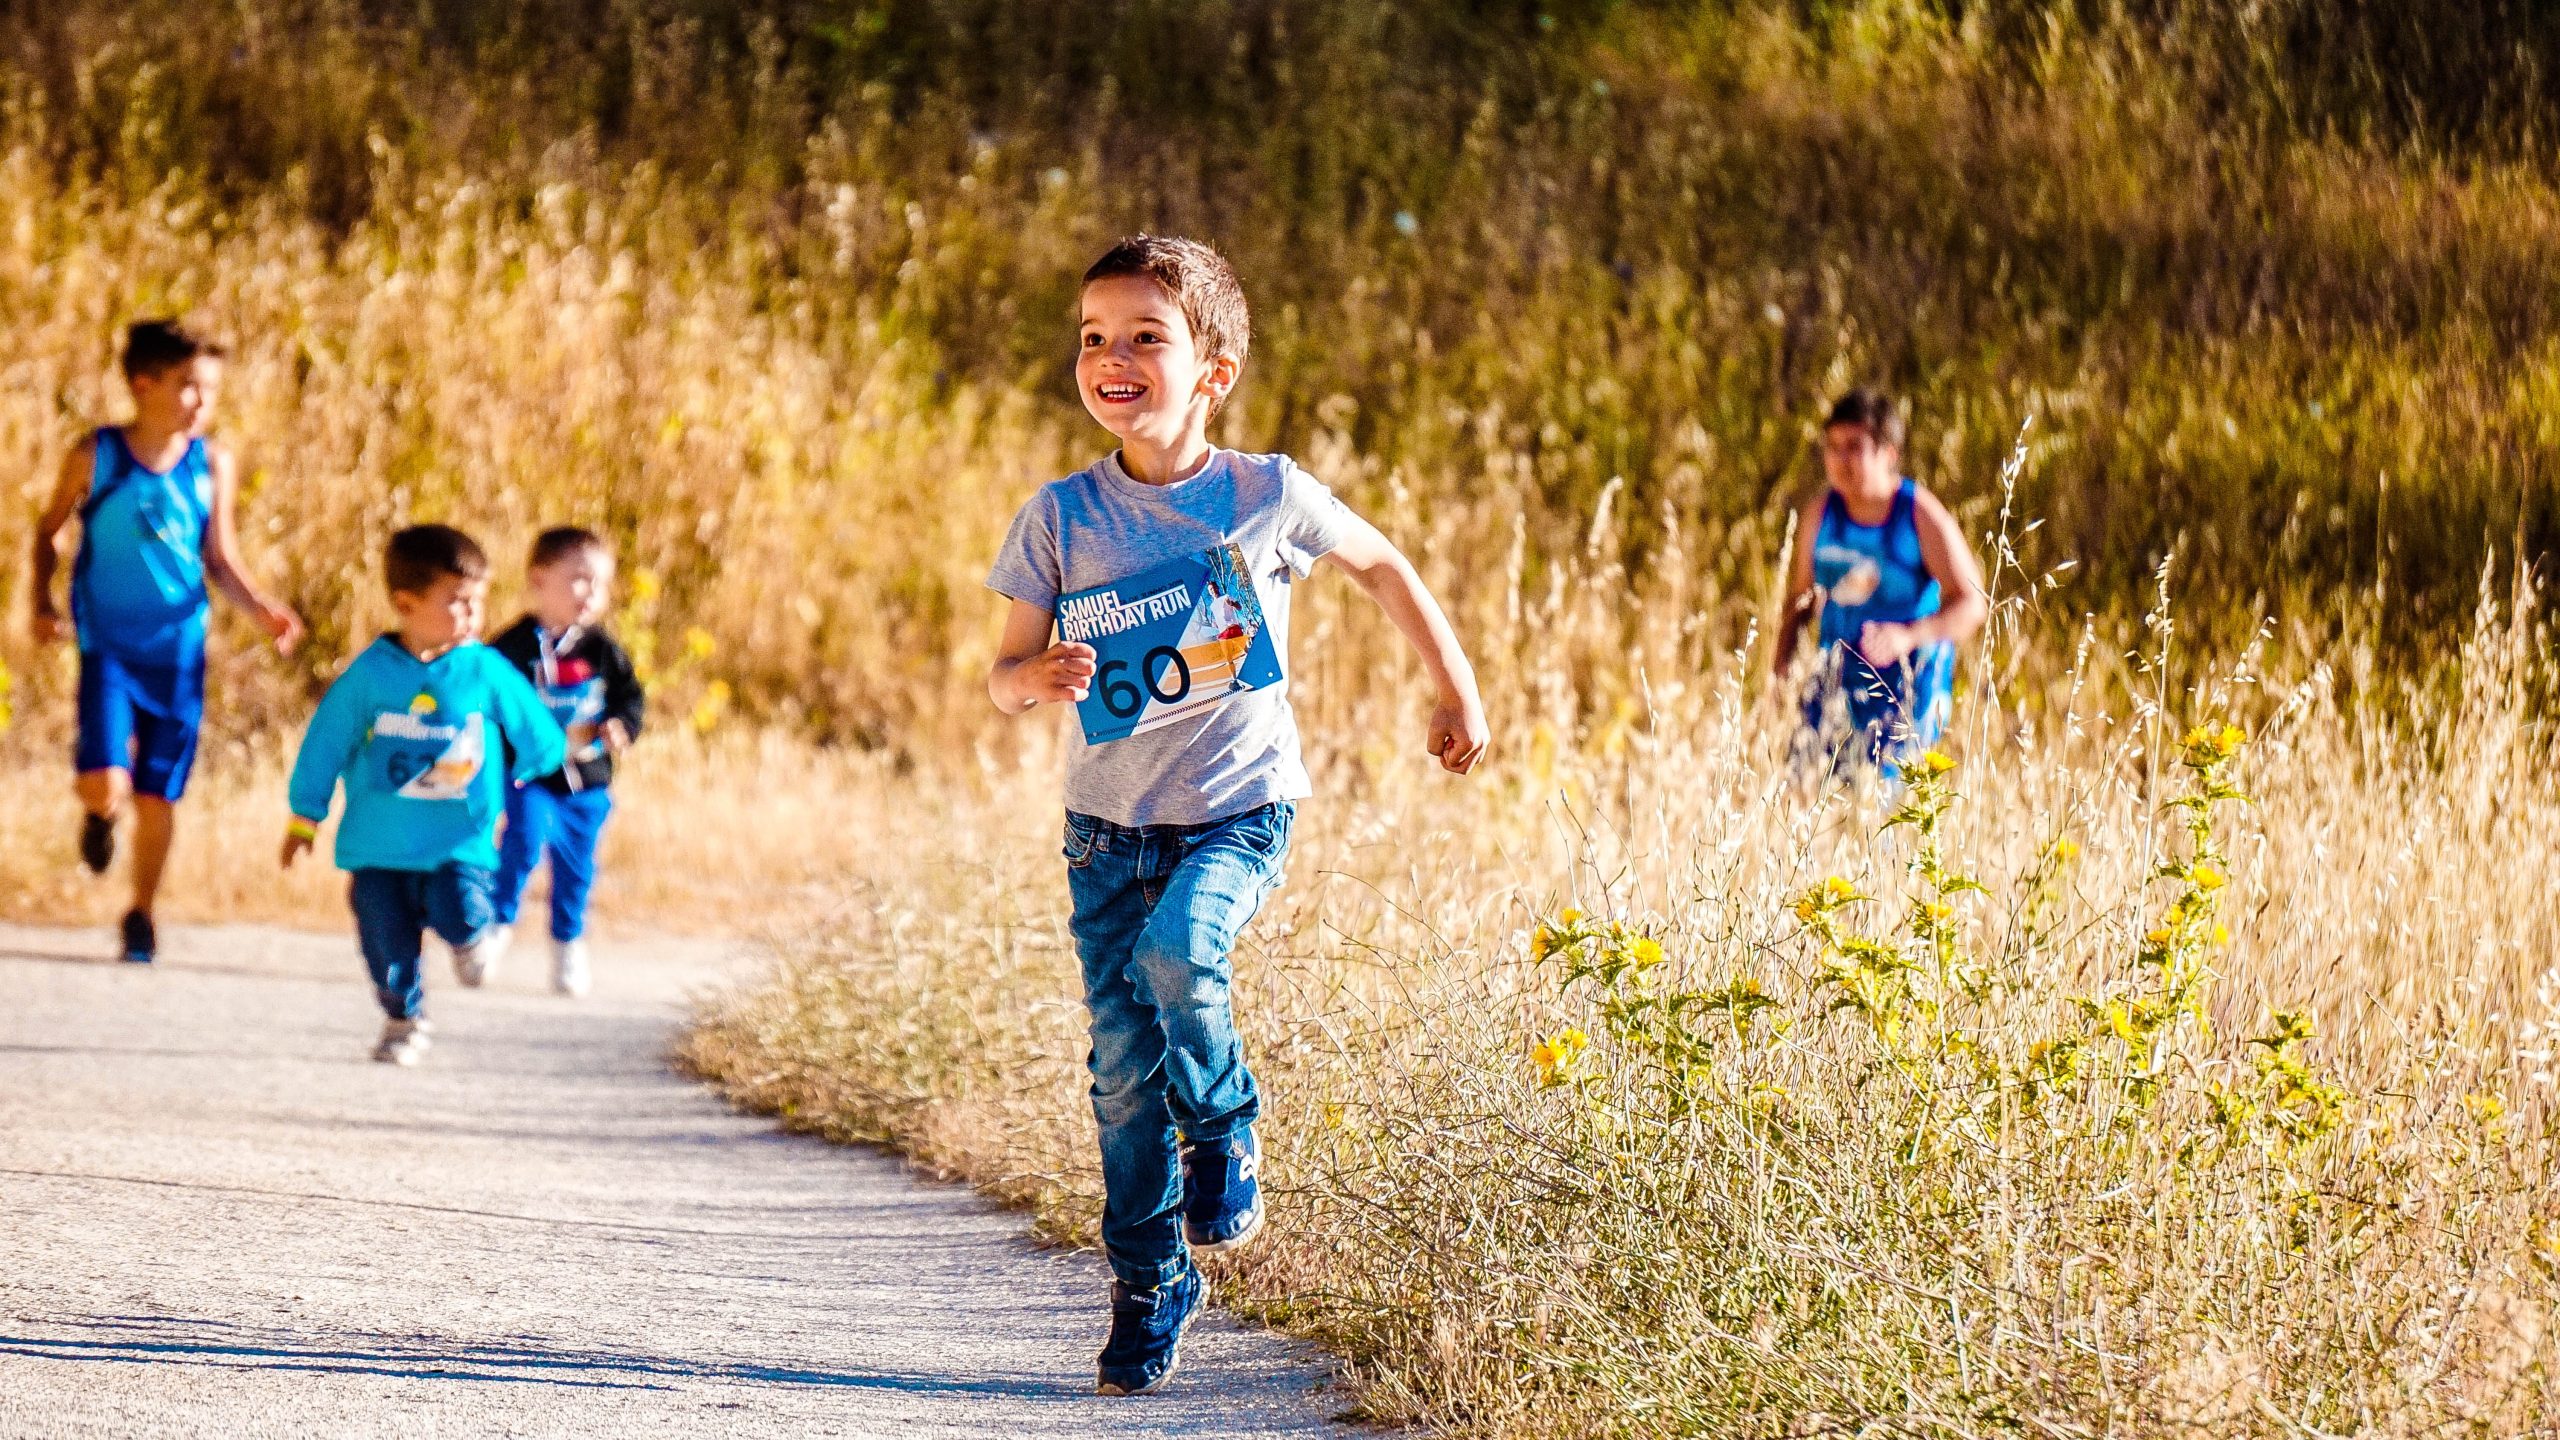 Children participating in a fun run outdoors on a sunny day.